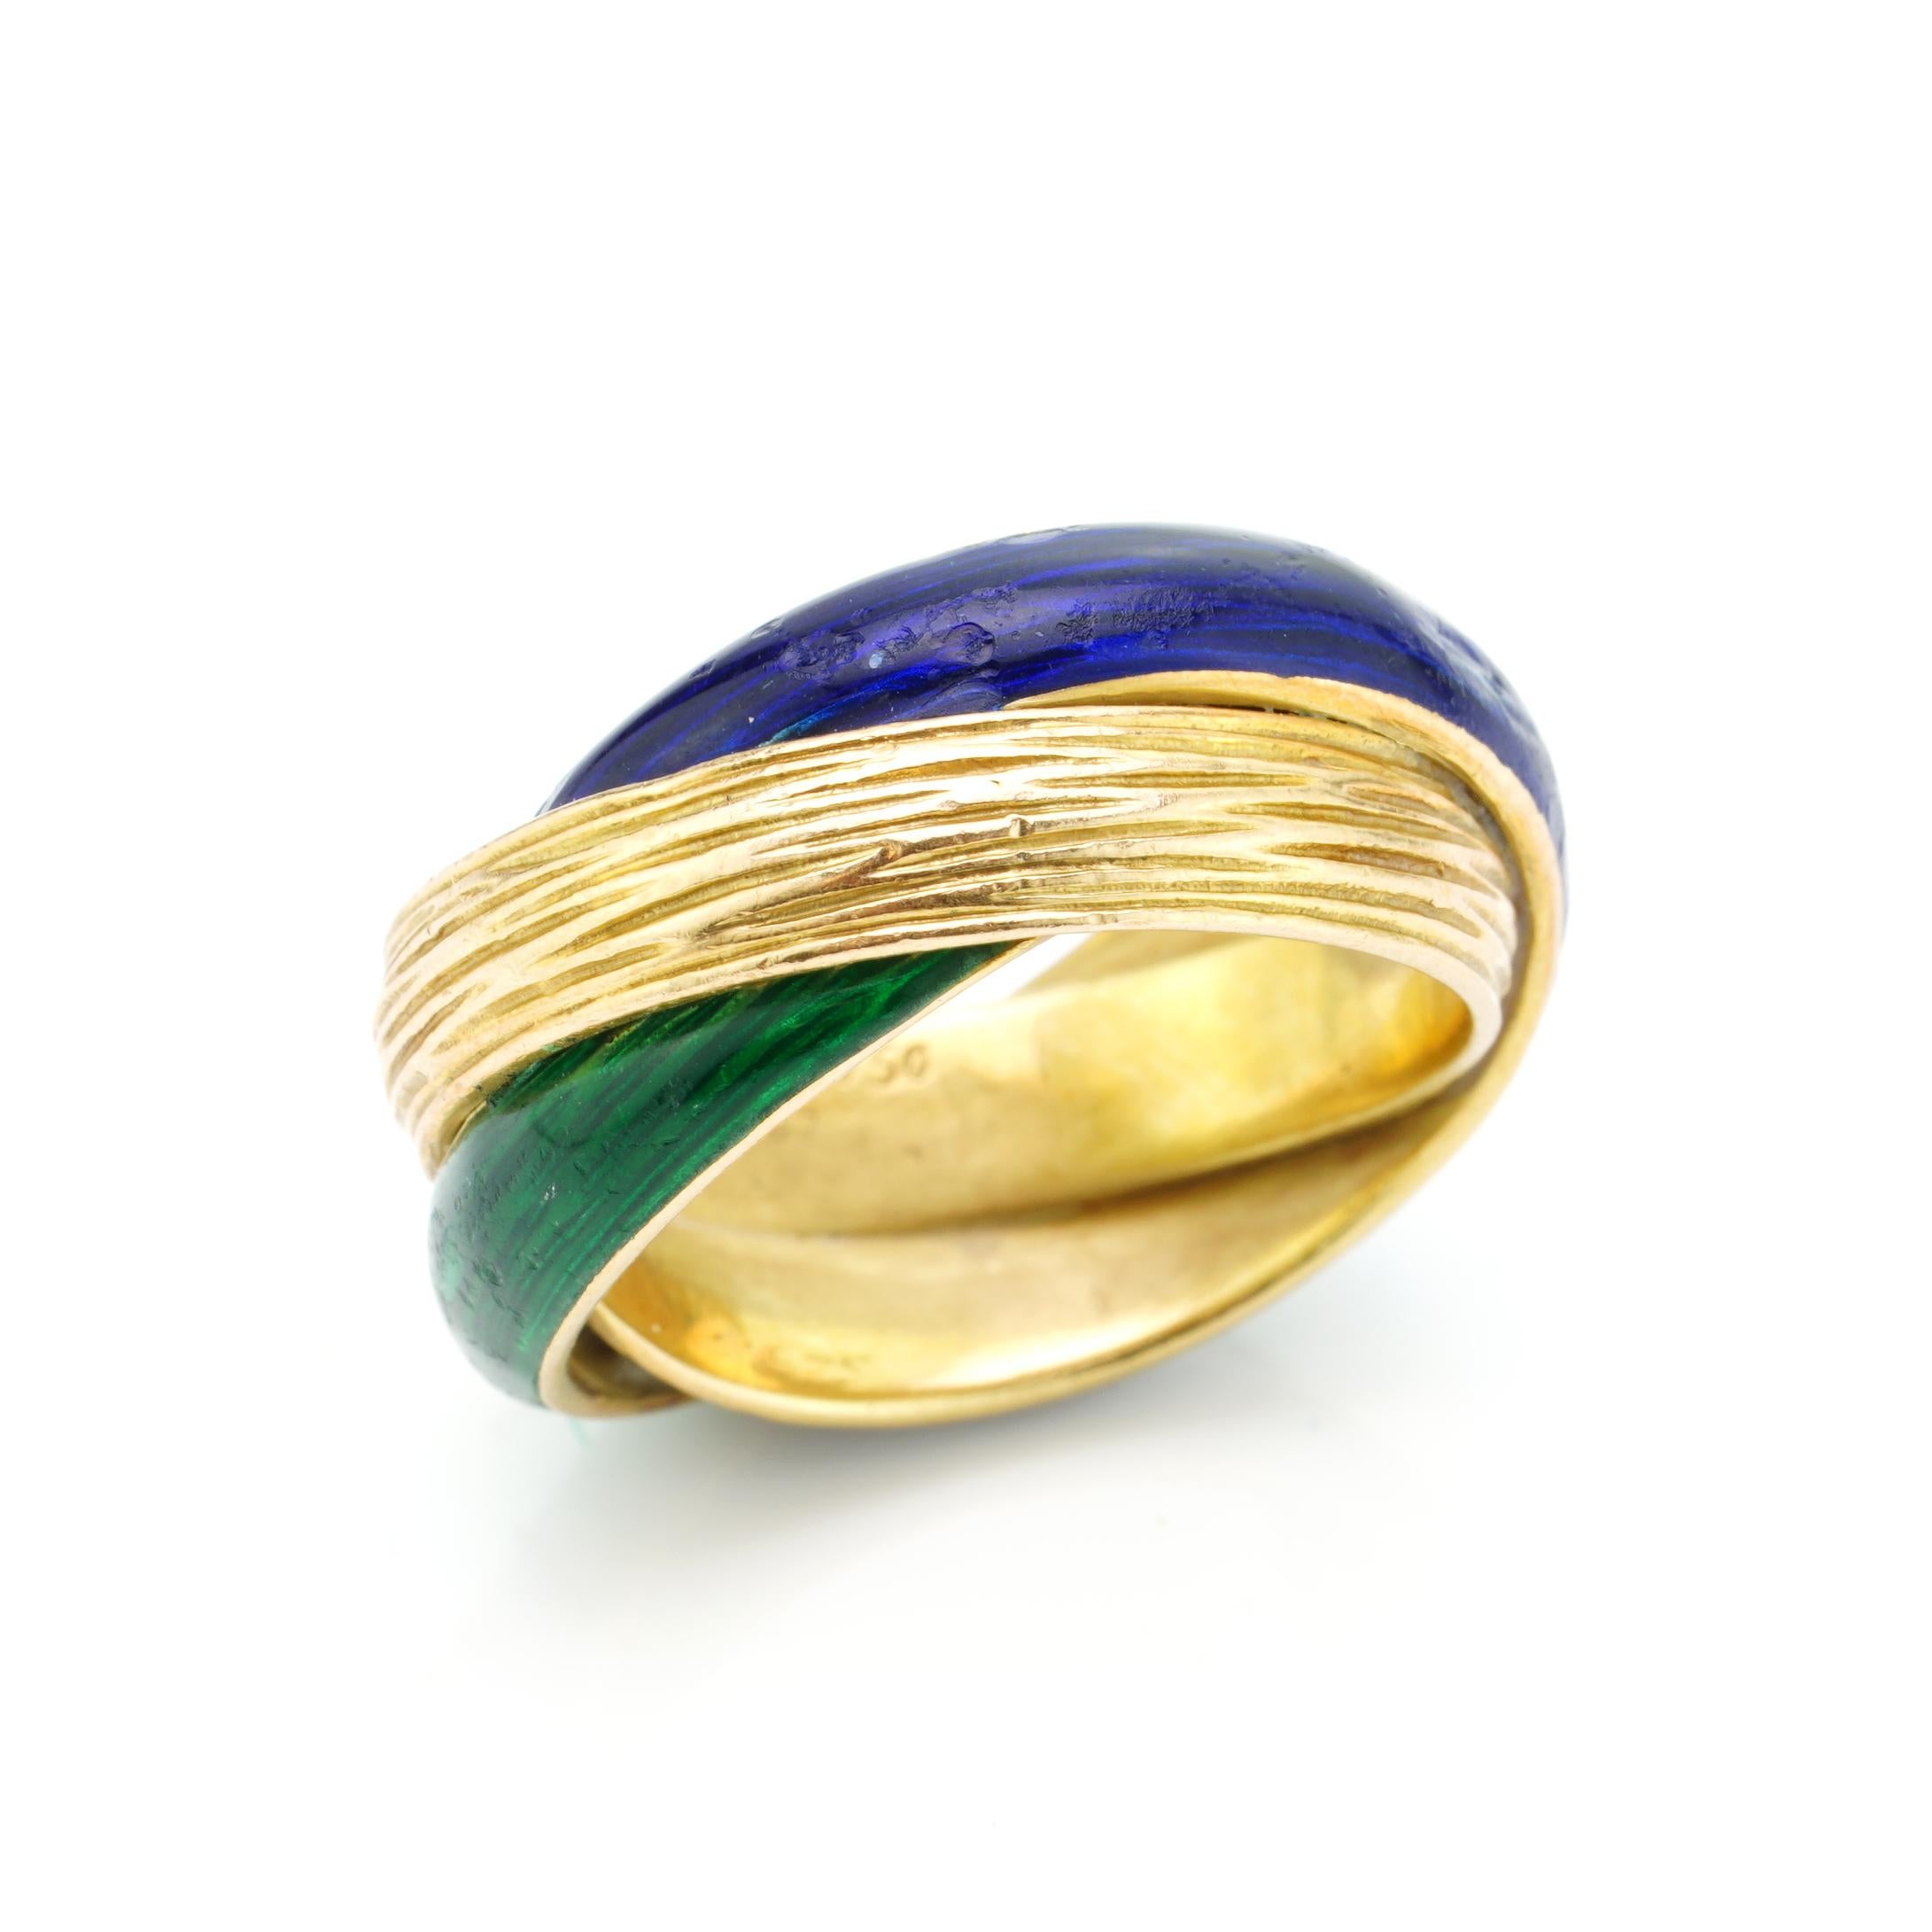 Vintage Van Cleef & Arpels 18kt. yellow gold. twisted red and blue enamel ring. 
Designer: Van Cleef & Arpels
Made in 1960's
Fully hallmarked with Ref nr. 11575. 

Dimensions -
Finger Size (UK) = M (US) = 6 1/2 (EU) = 52 1/2
Ring size: 2.3 x 0.9 cm